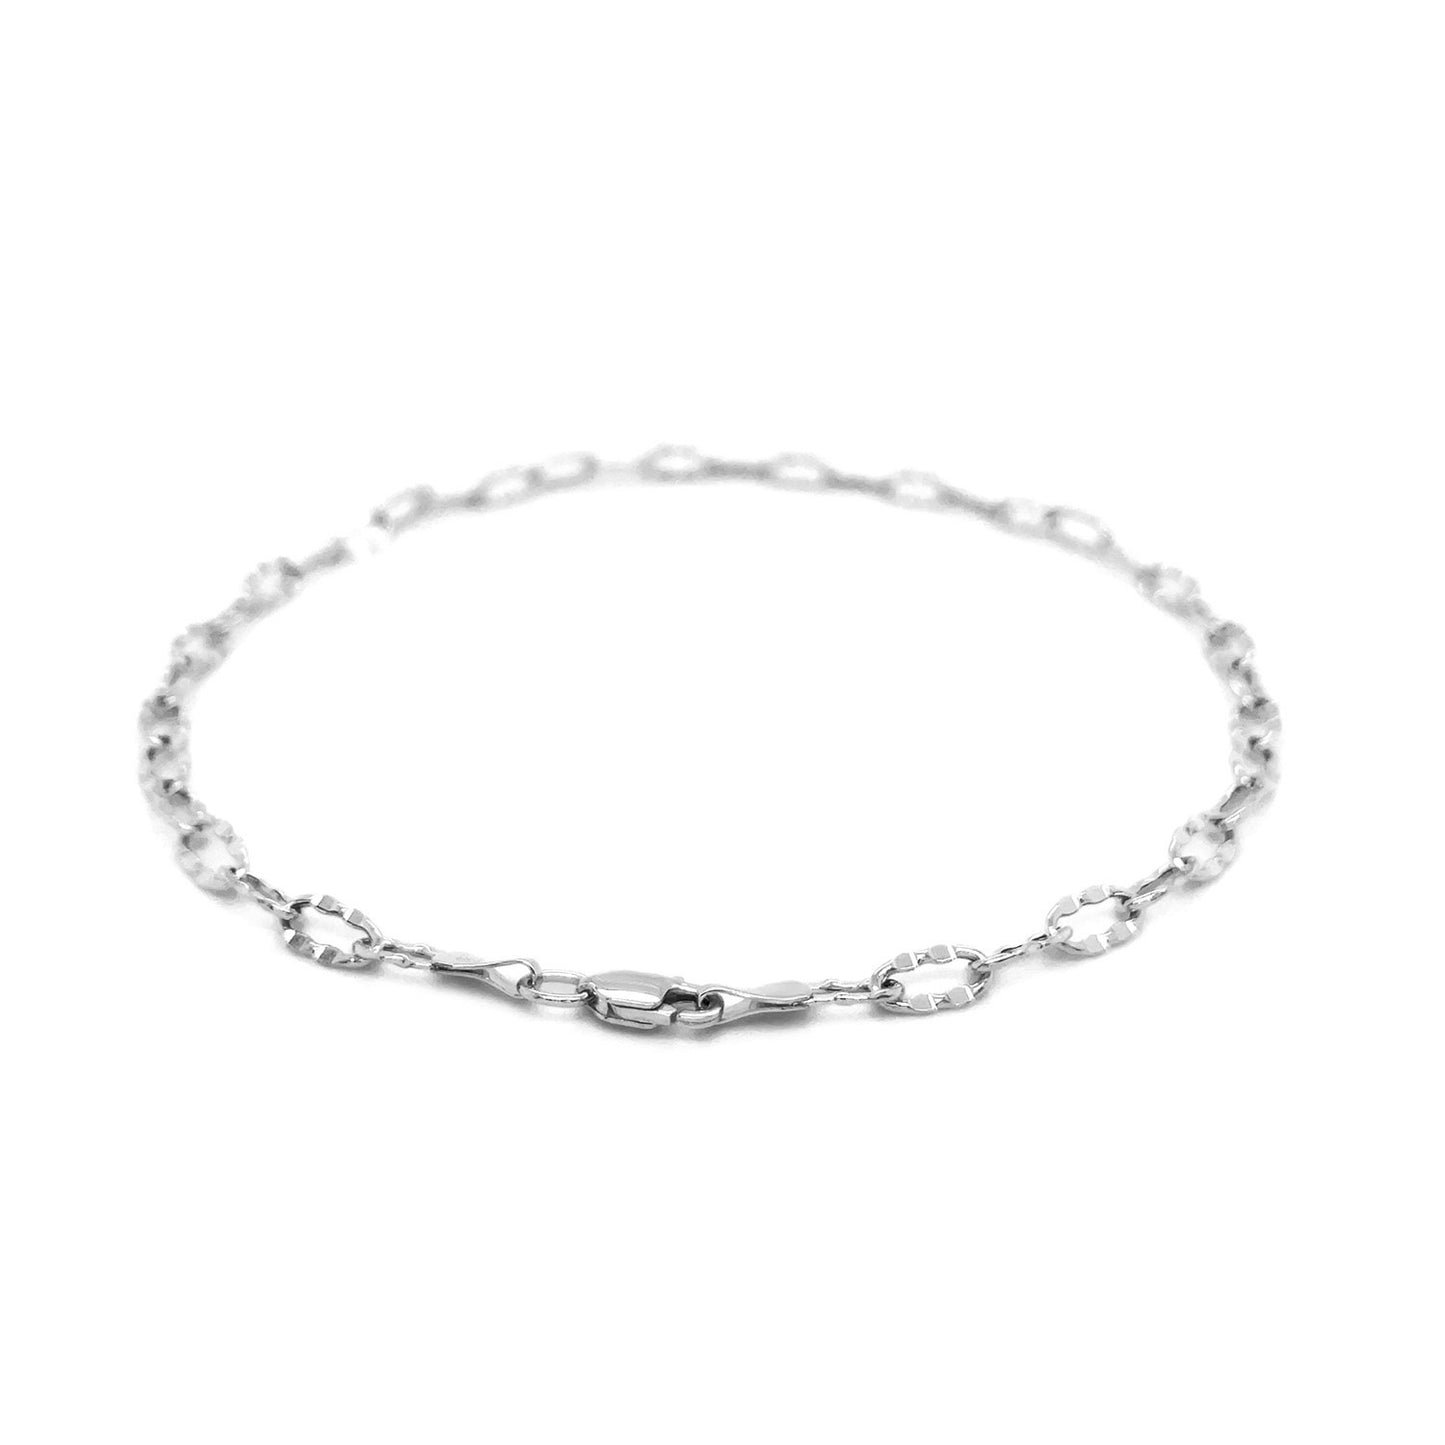 14k White Gold Anklet with Fancy Hammered Oval Links